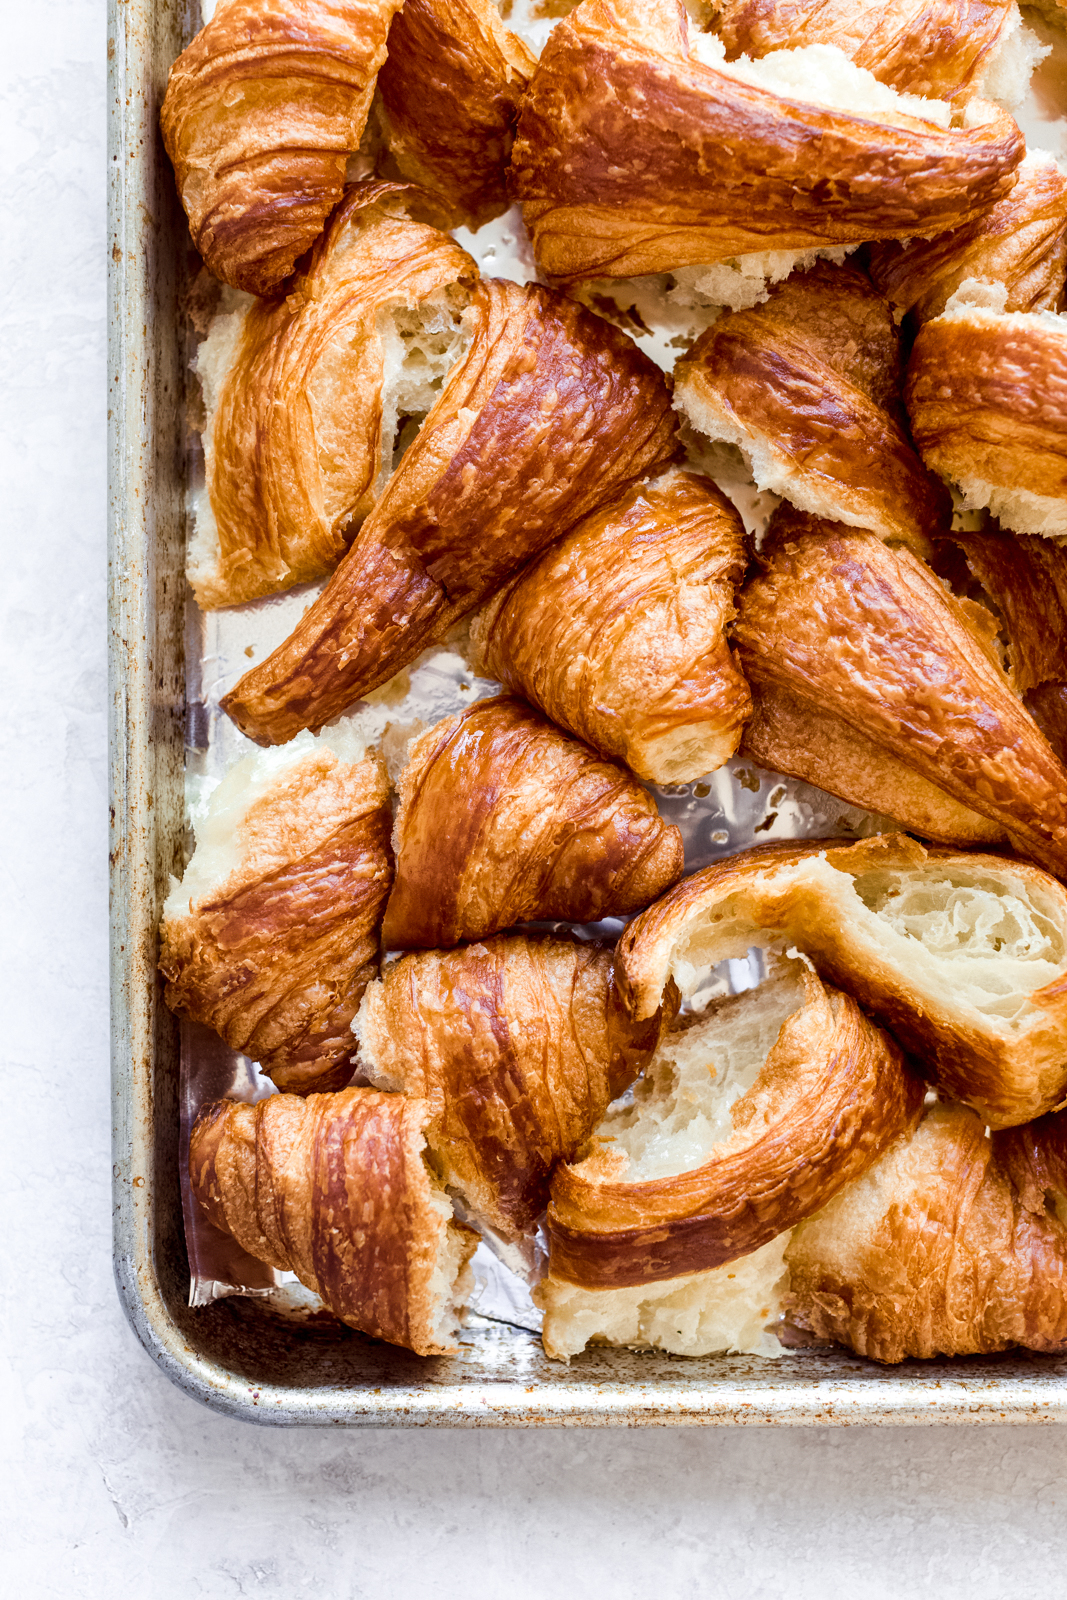 broken croissant on baking sheet lined with foil